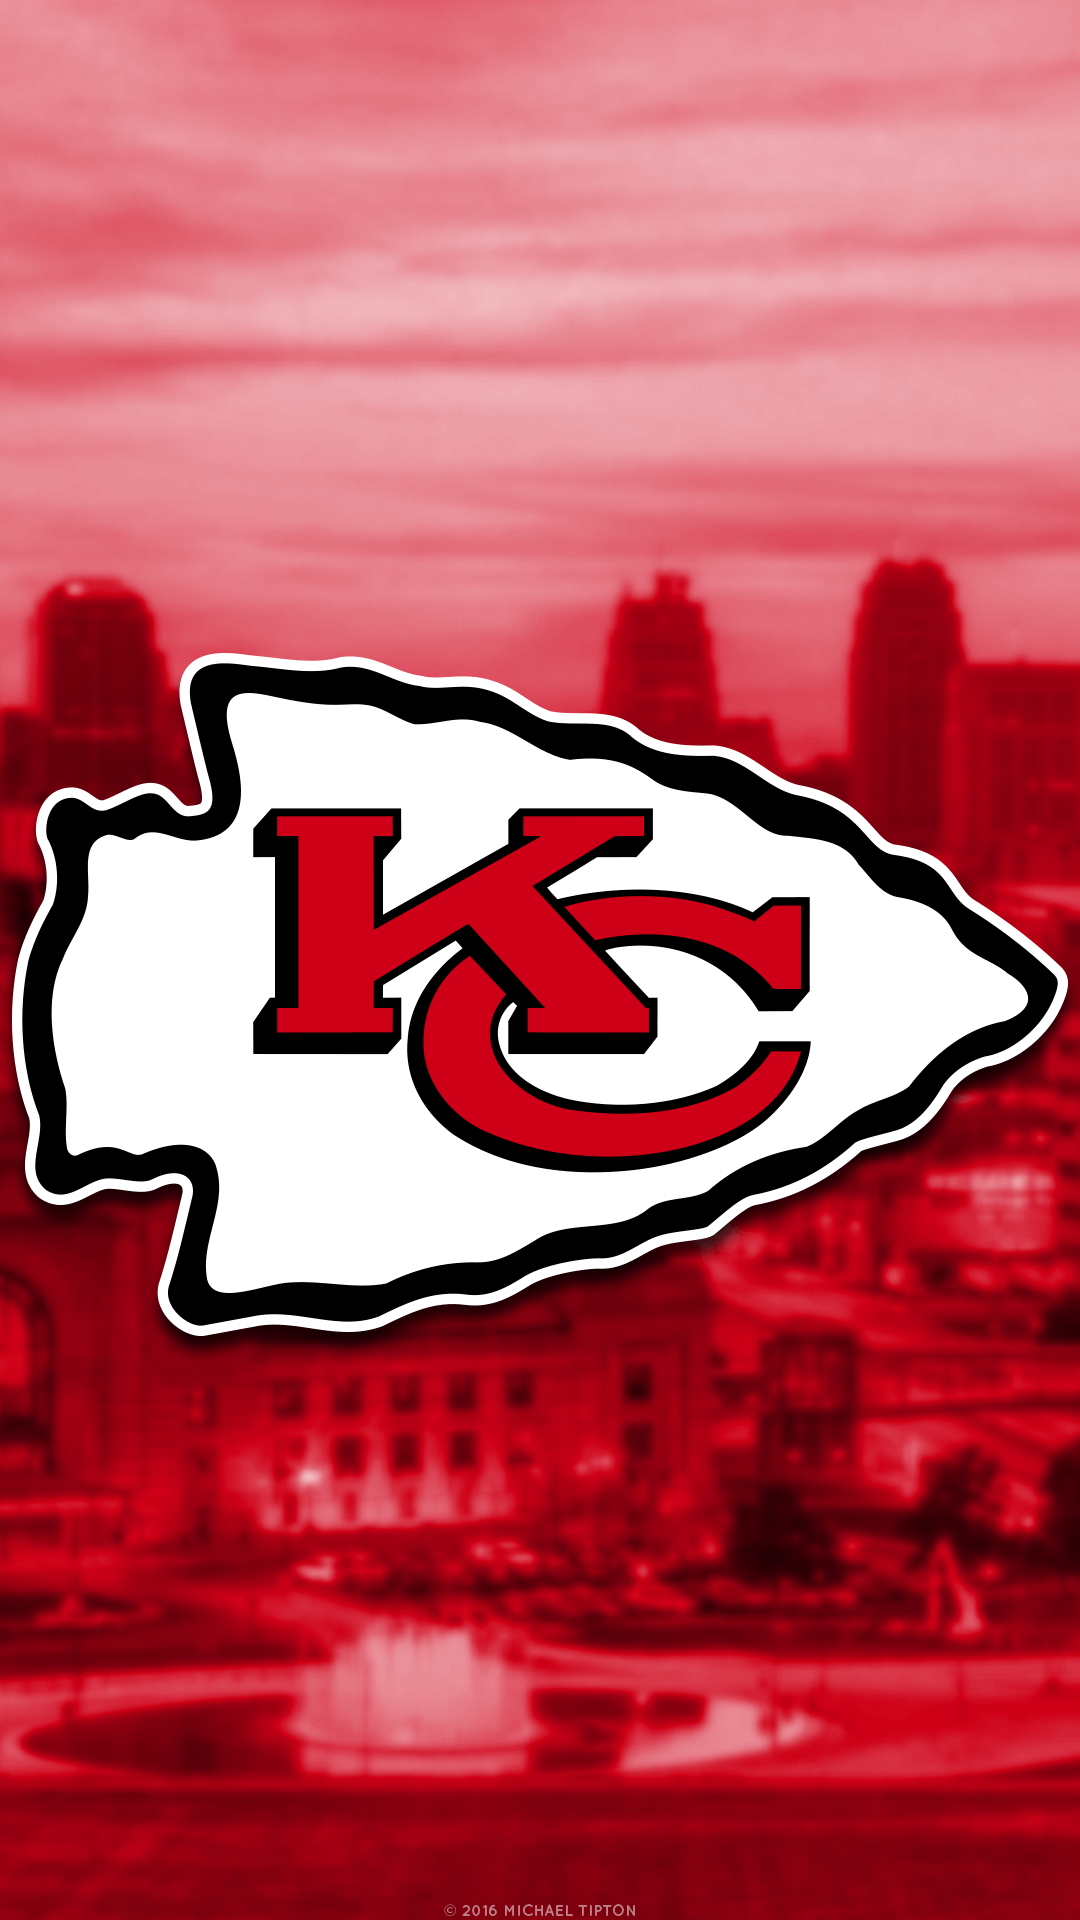 Kansas City Chiefs on Twitter WallpaperWednesday RedFriday edition   Let It Fly  httpstcoLOy9uNNAKU  Twitter